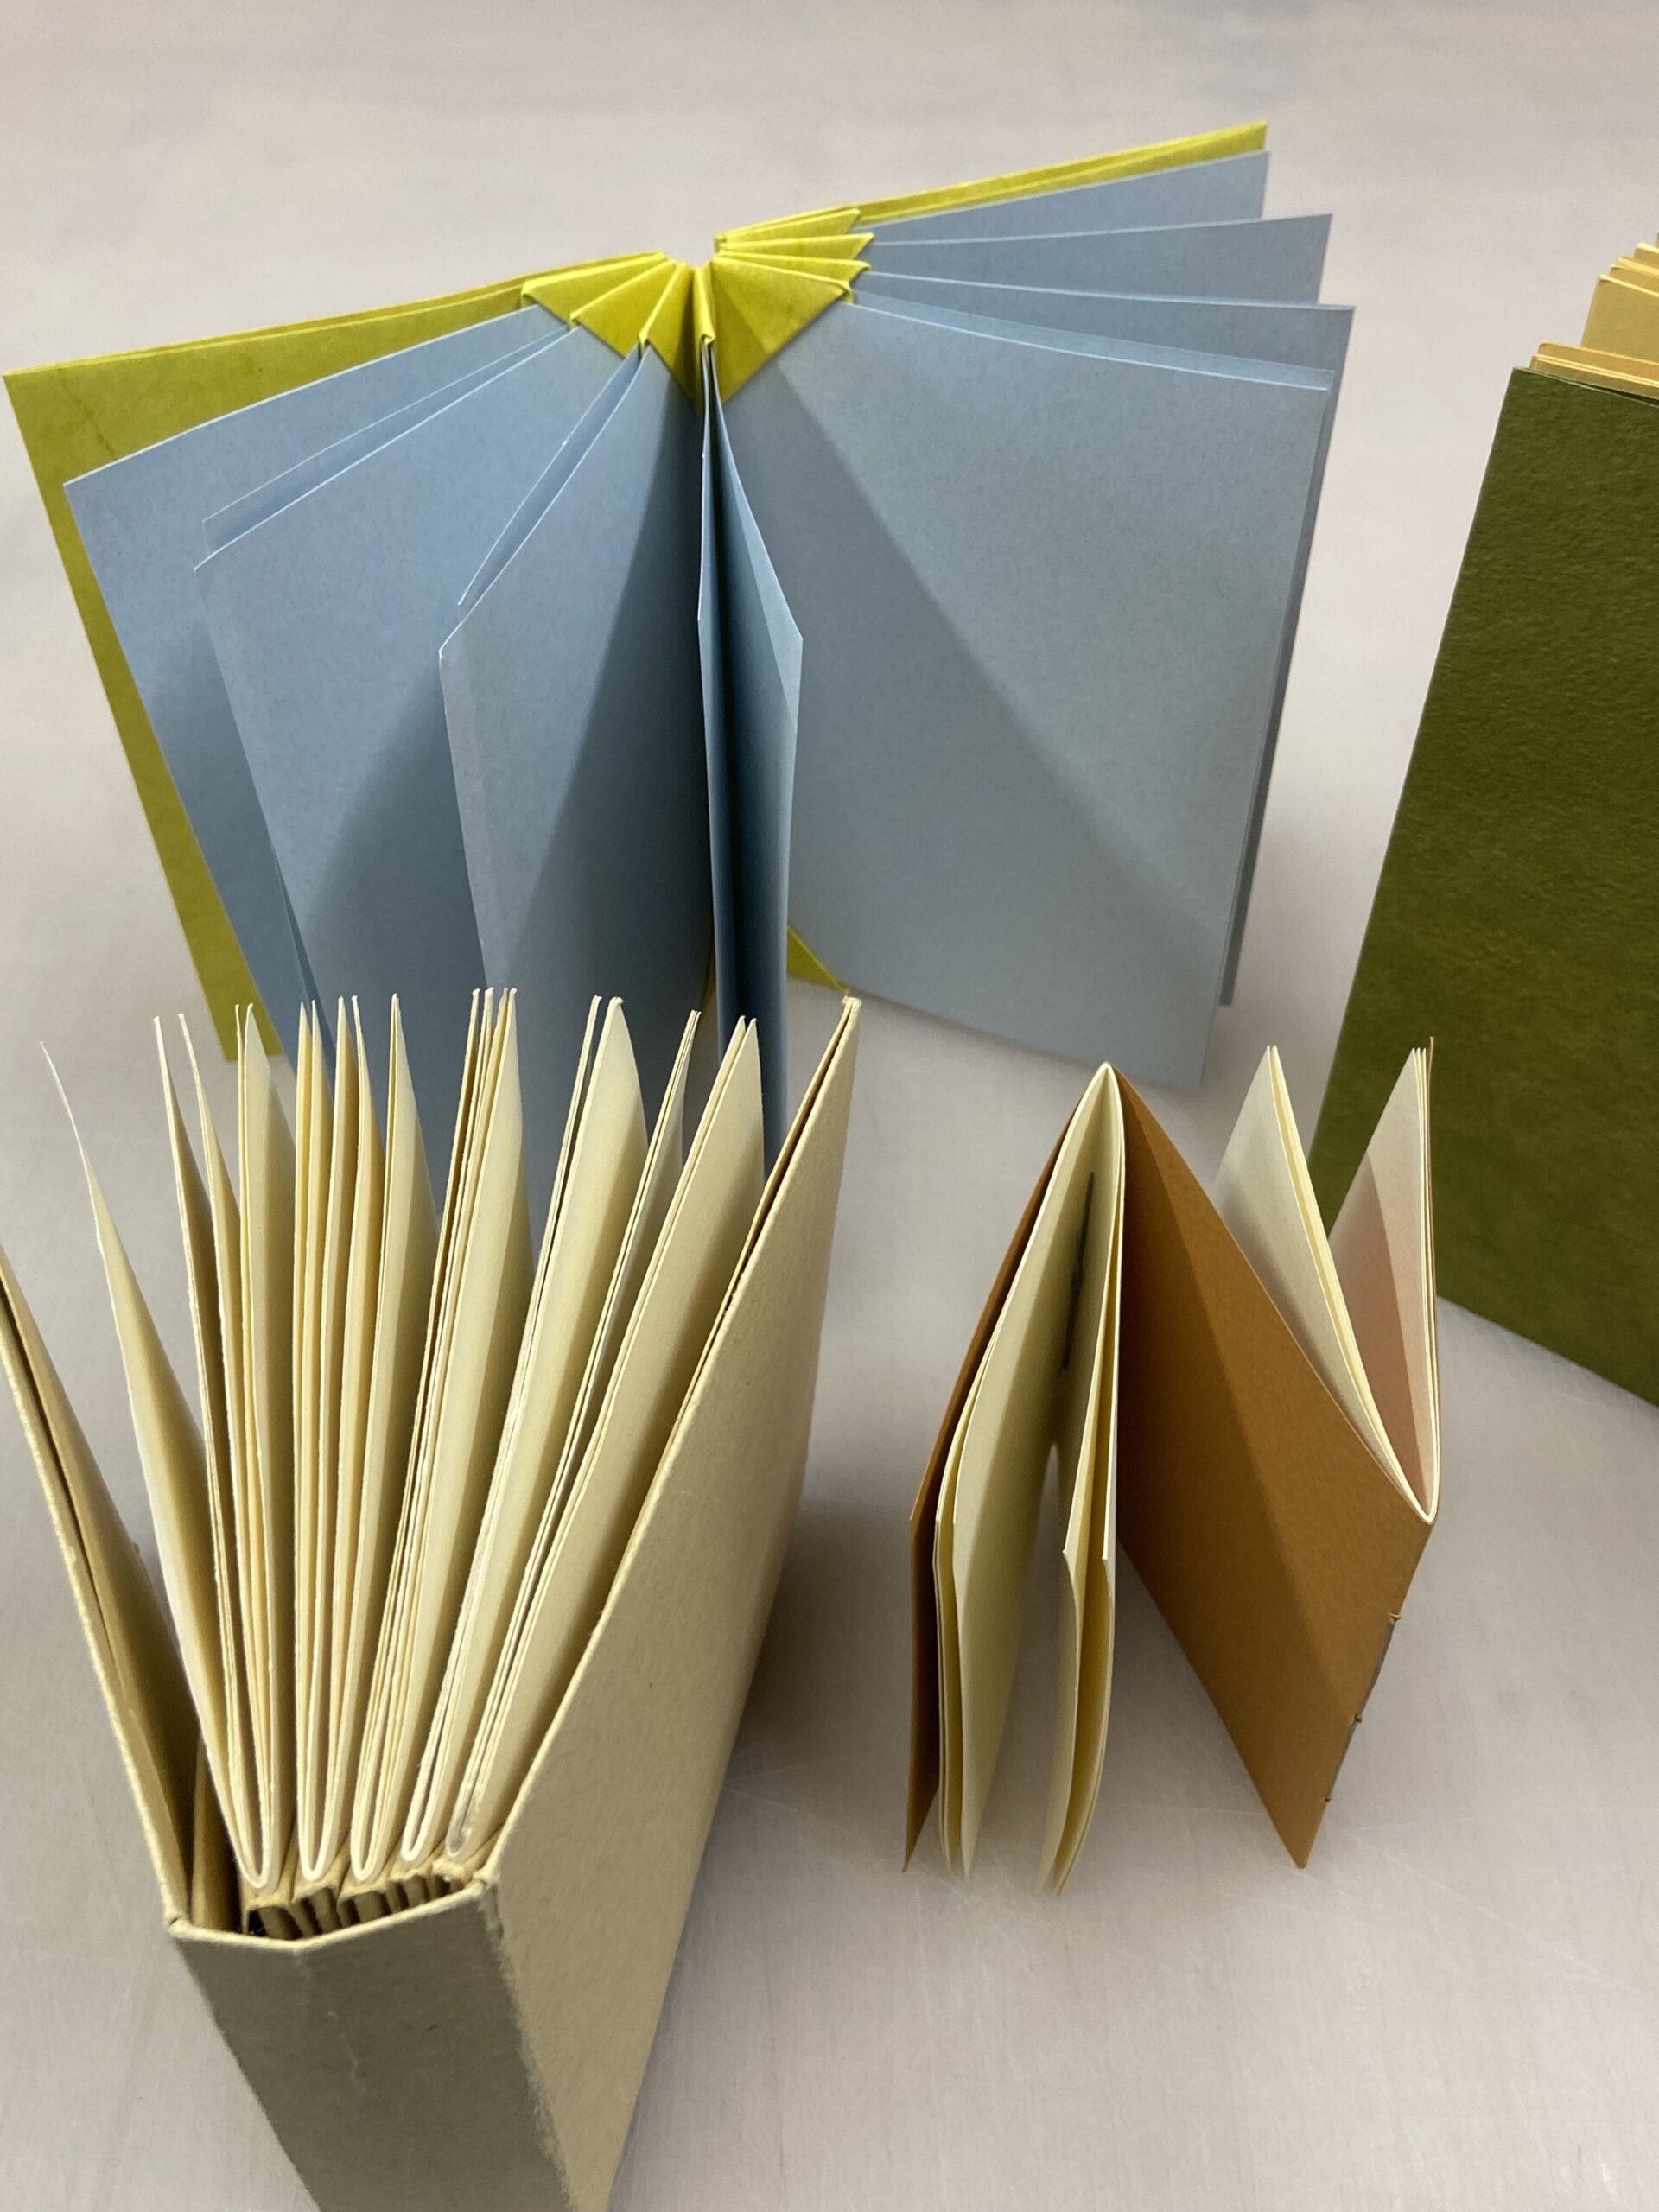 Bookbinding with Paper, Thread, and Tape - Center for Book Arts